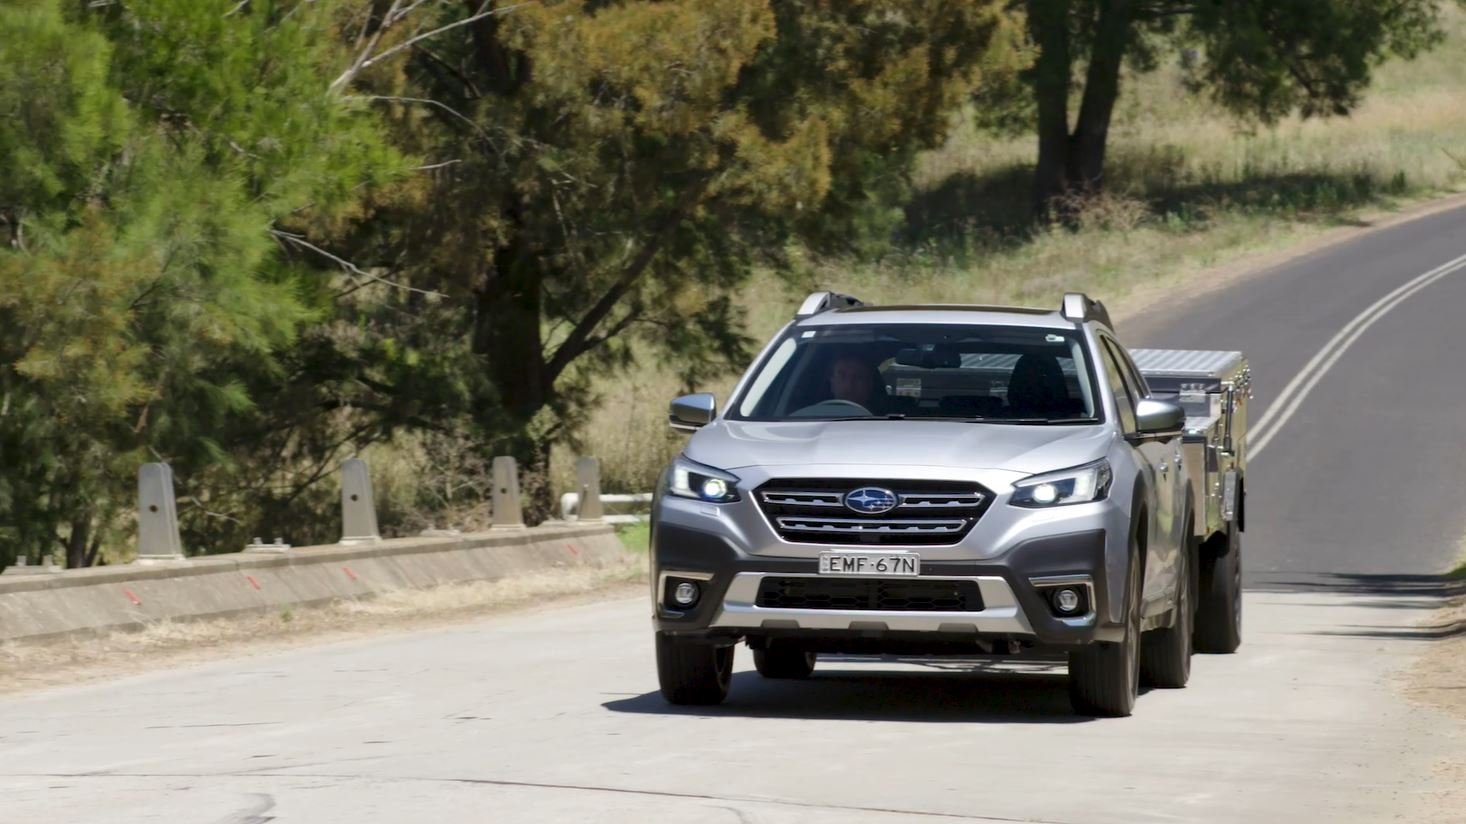 Outback 2.5 is a comfy cruiser, but lacked sportiness.